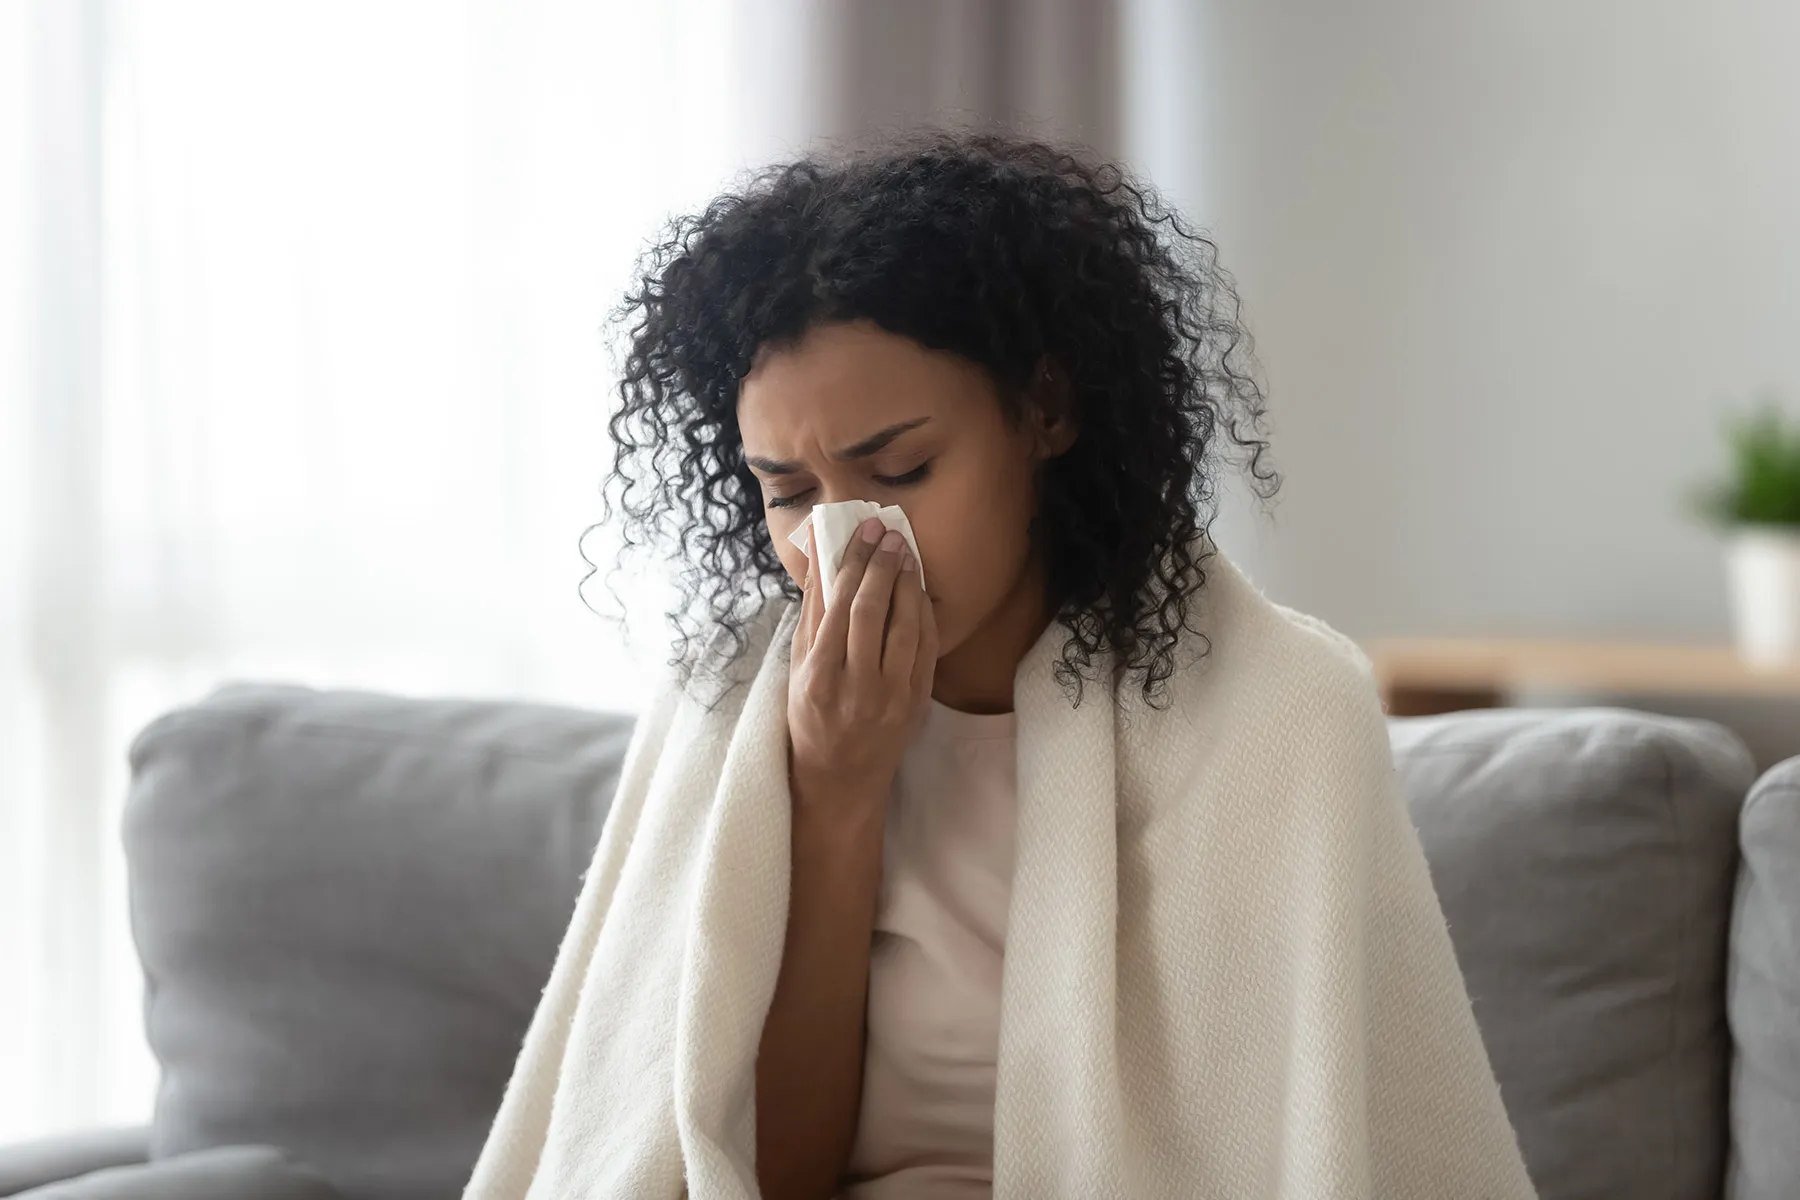 This Year's Flu Season: Repeat of Last Year or a ‘Twindemic?’